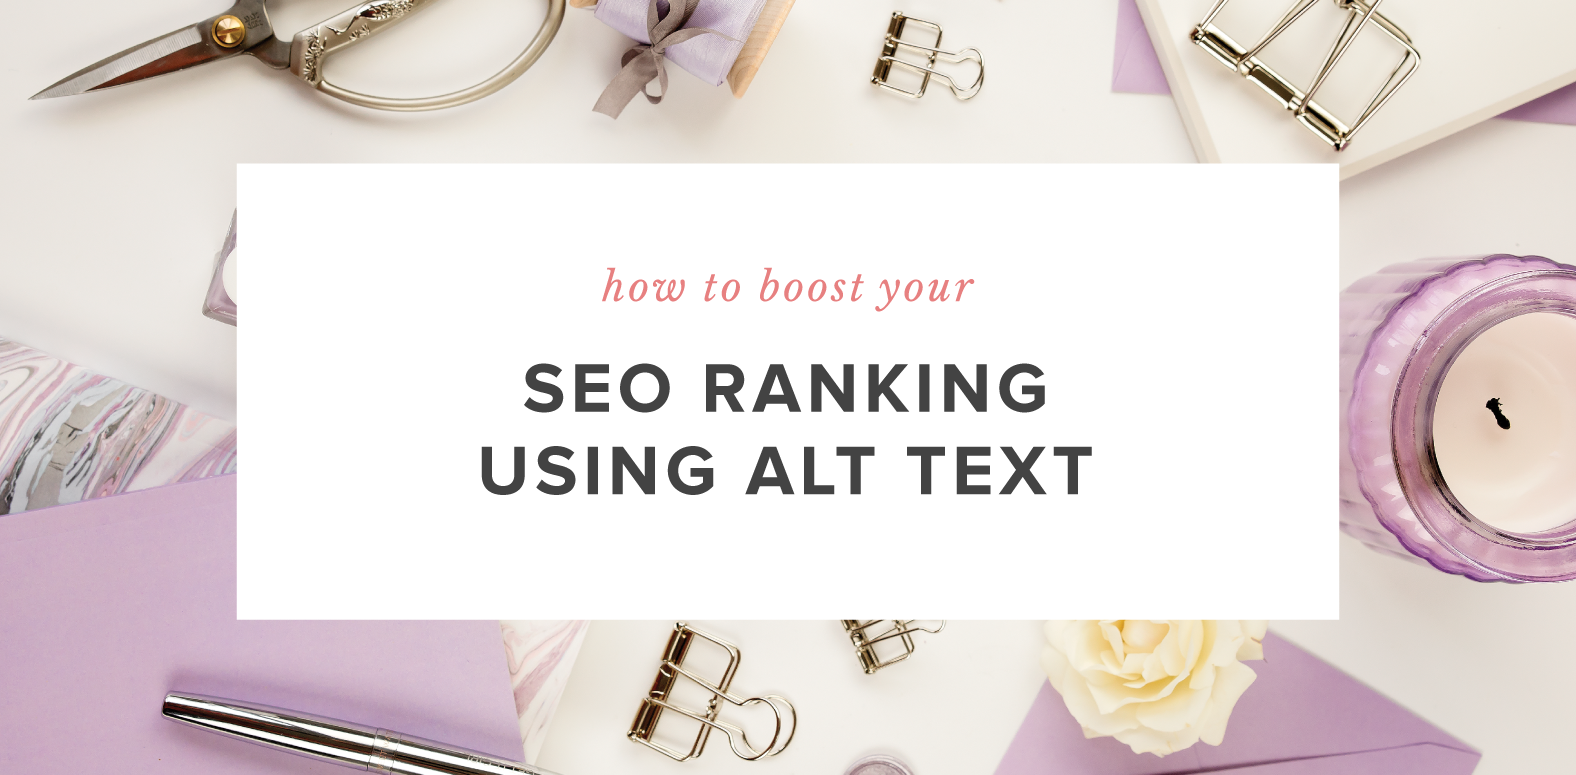 How to Boost Your SEO Ranking Using ALT Text